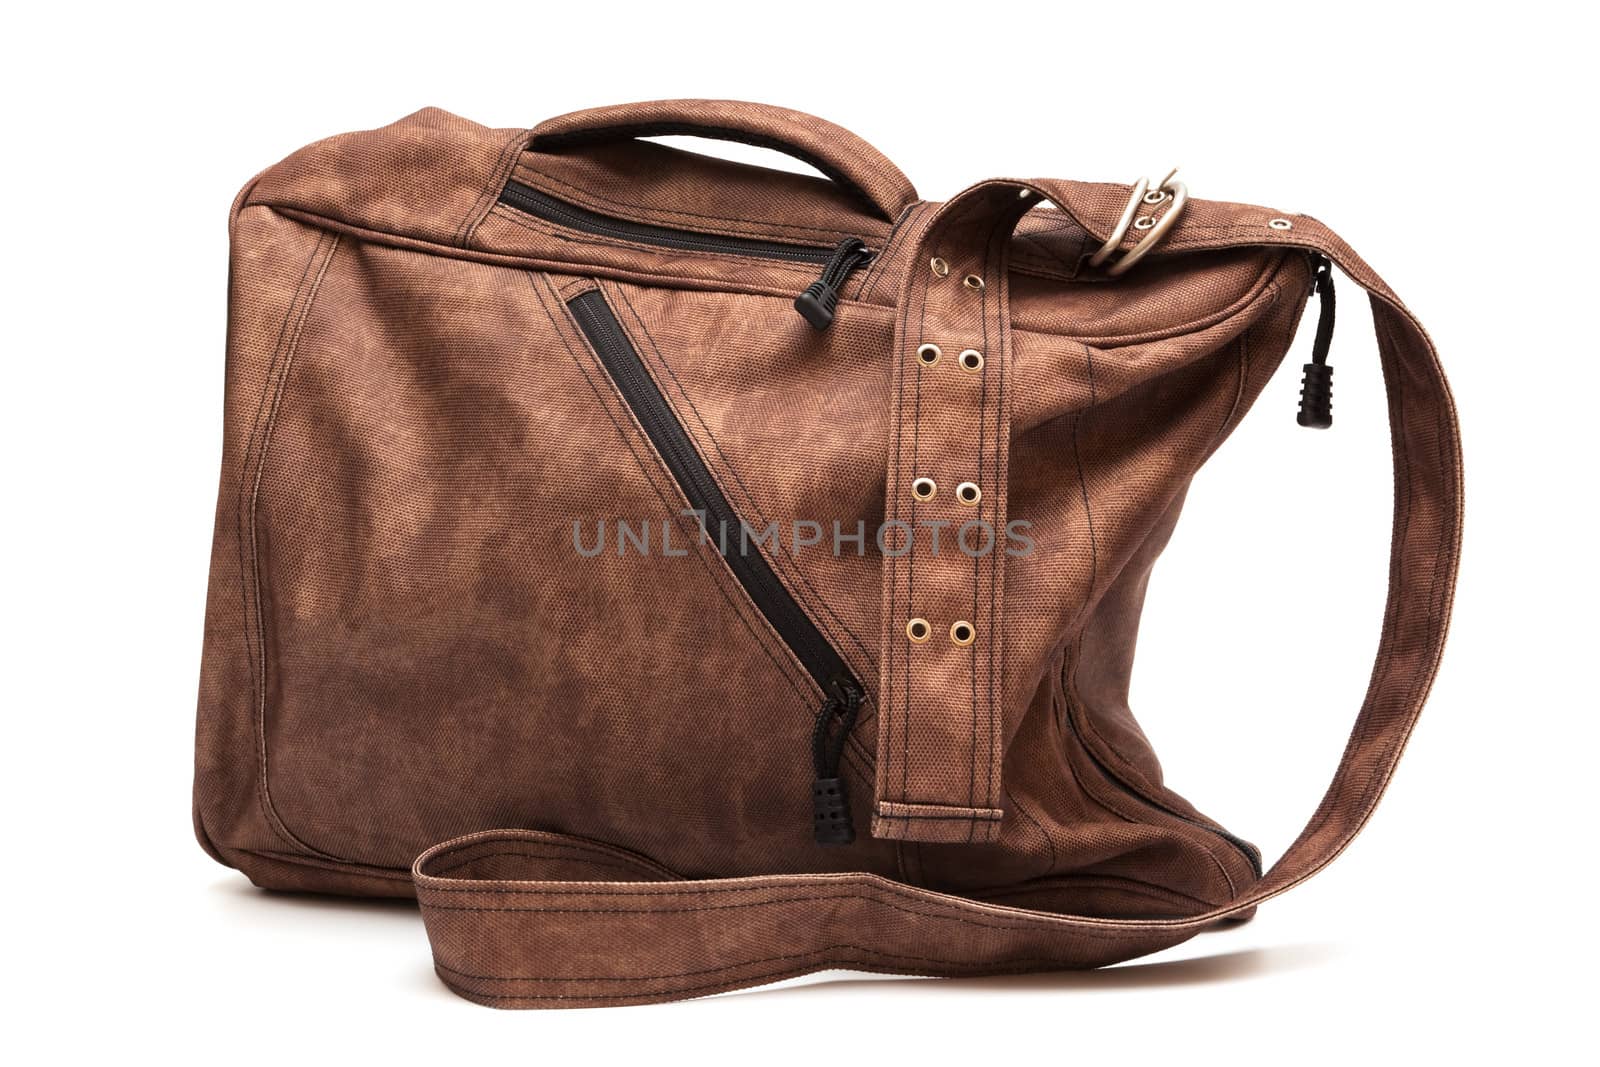 fashionable modern brown bag on white background